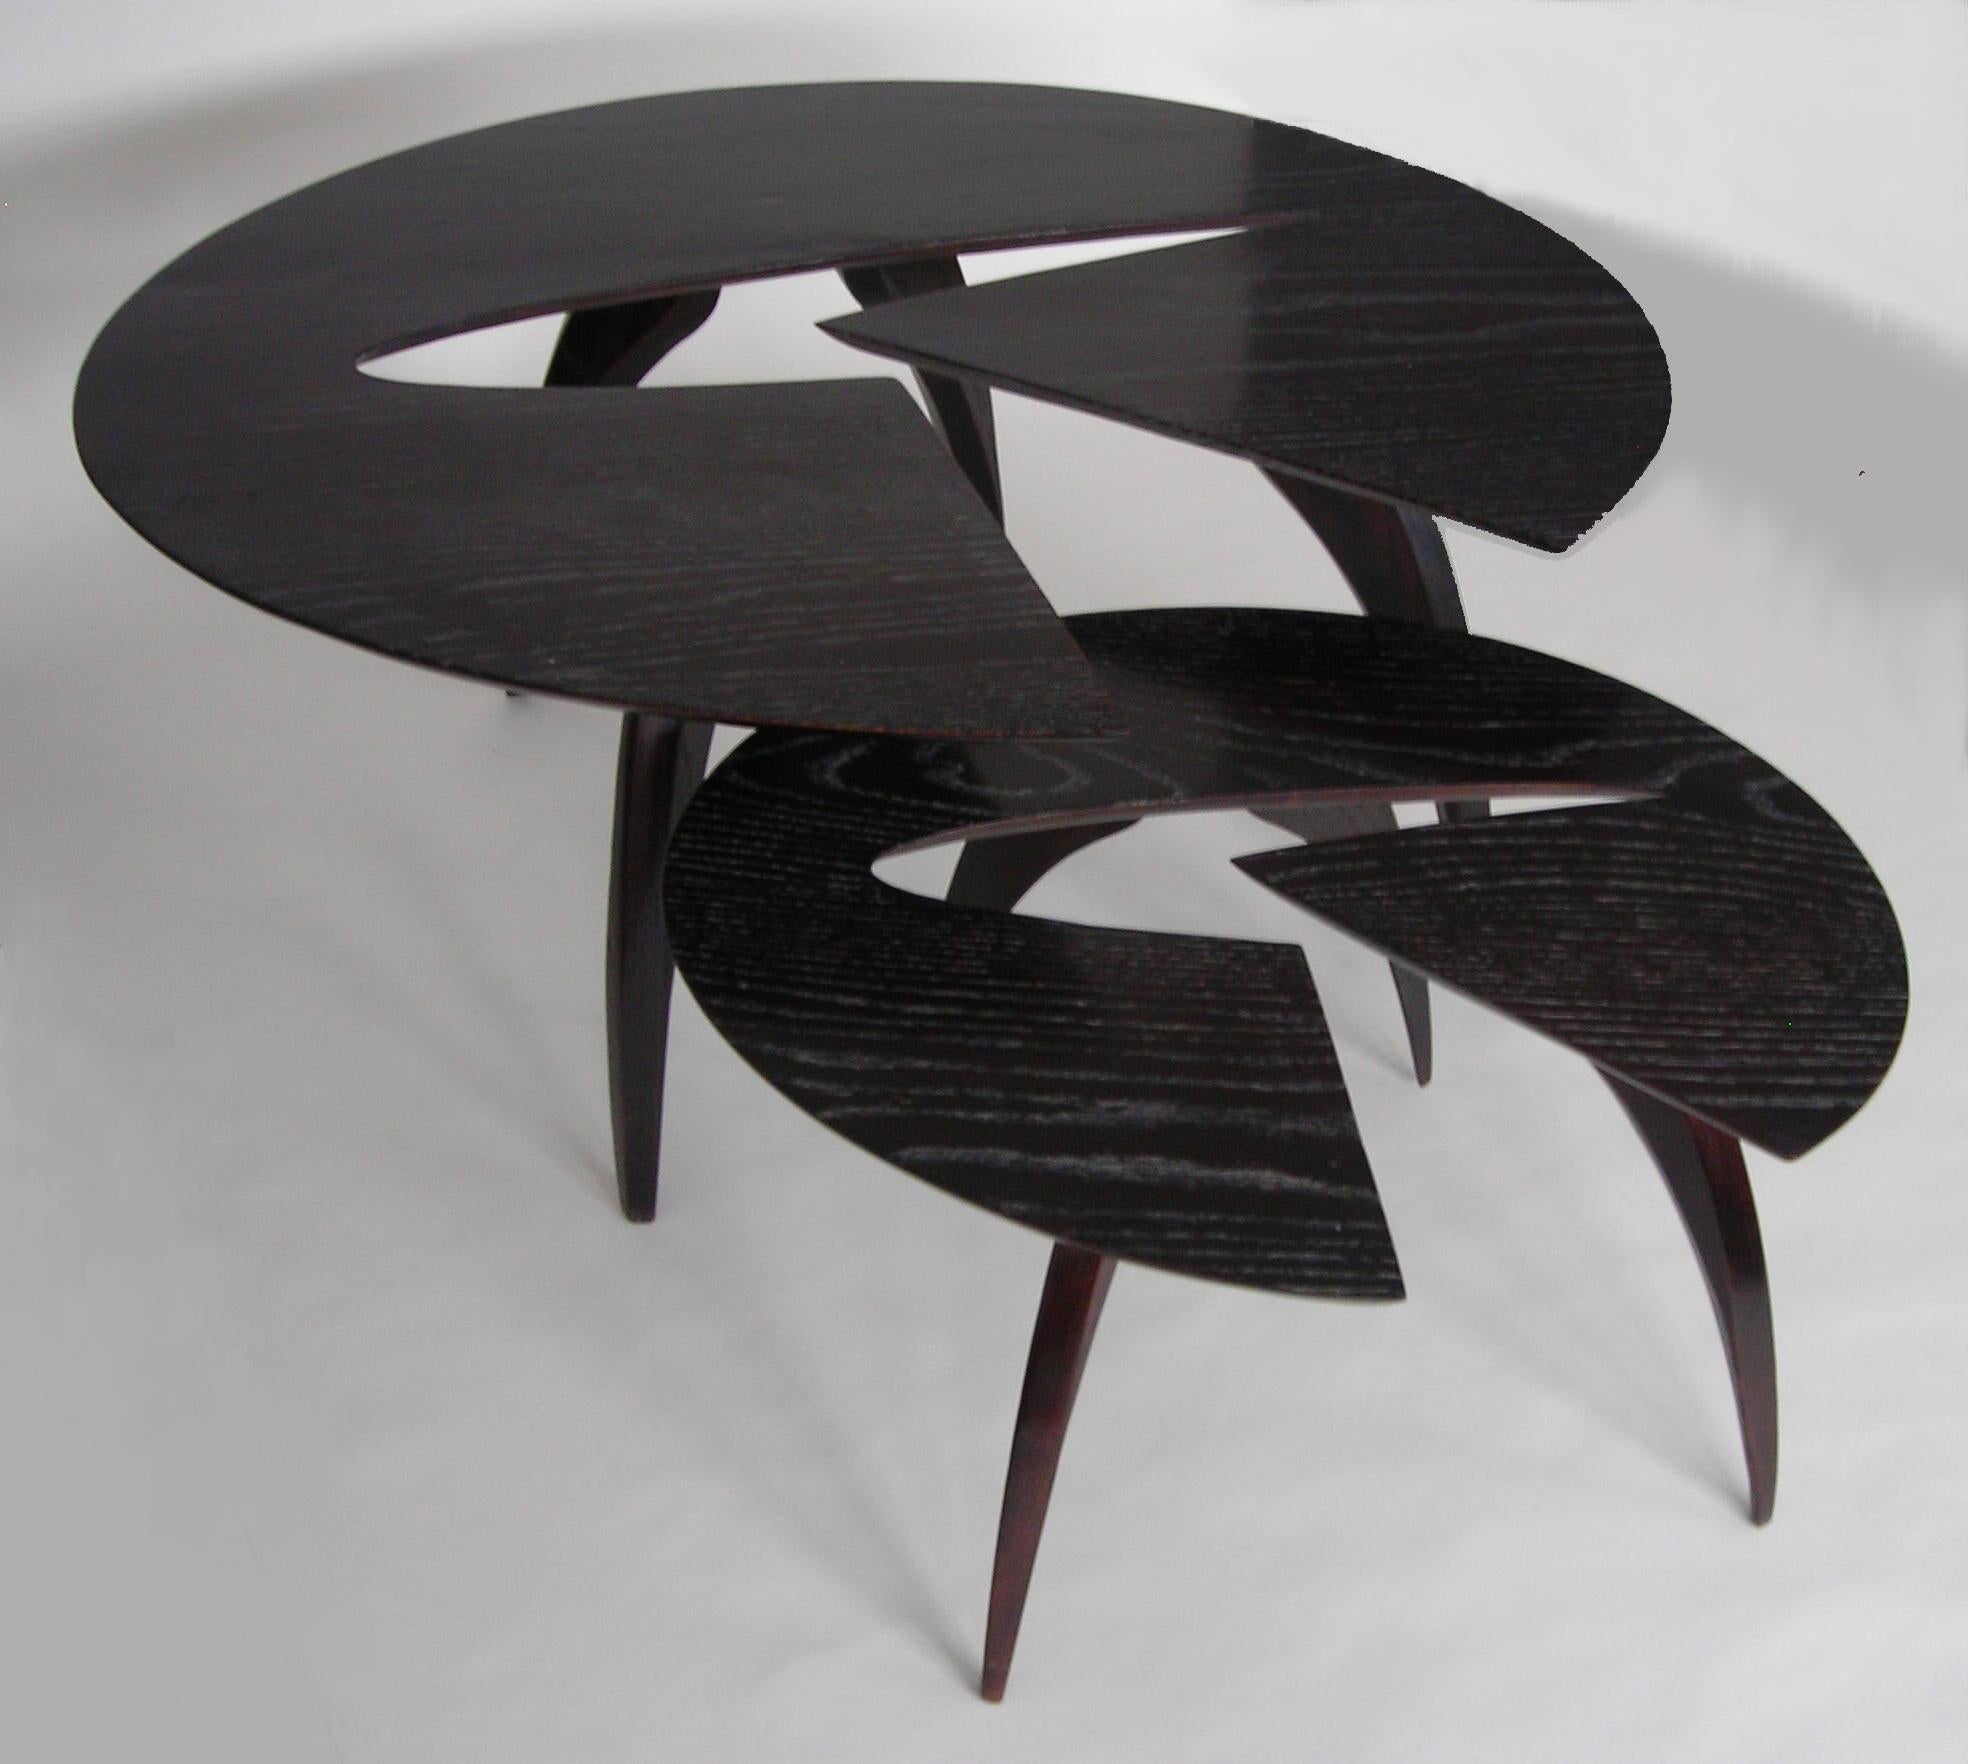 Alejandro Dron Abstract Sculpture - "C Cell" Hand Made Sculptural Table 